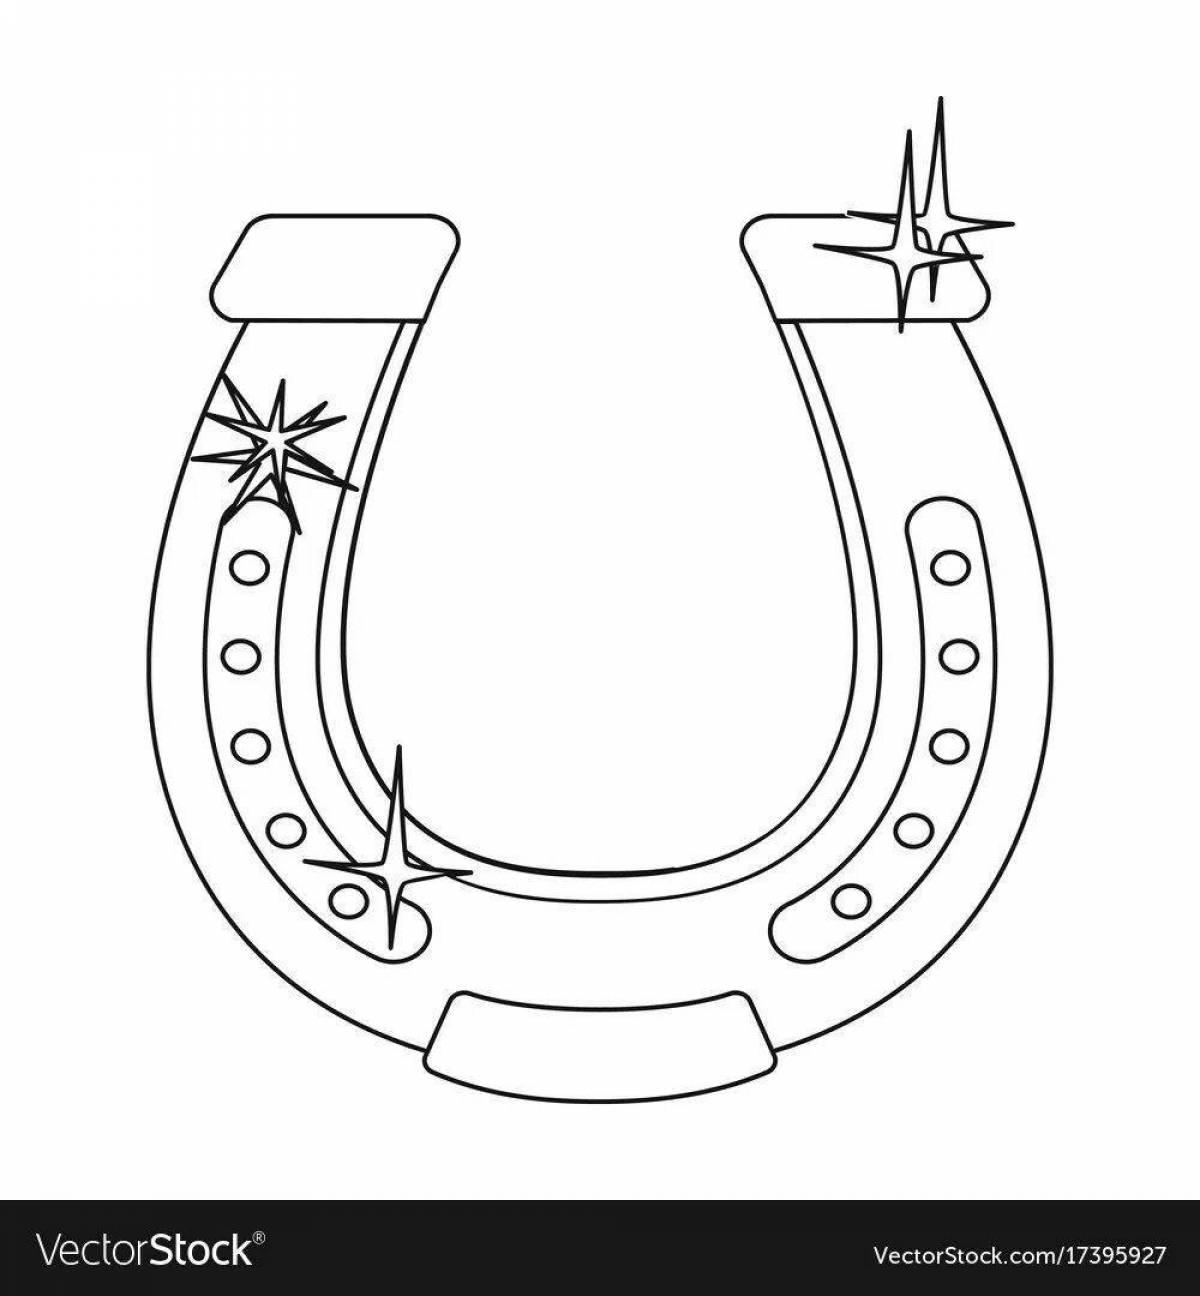 Great horseshoe coloring book for kids